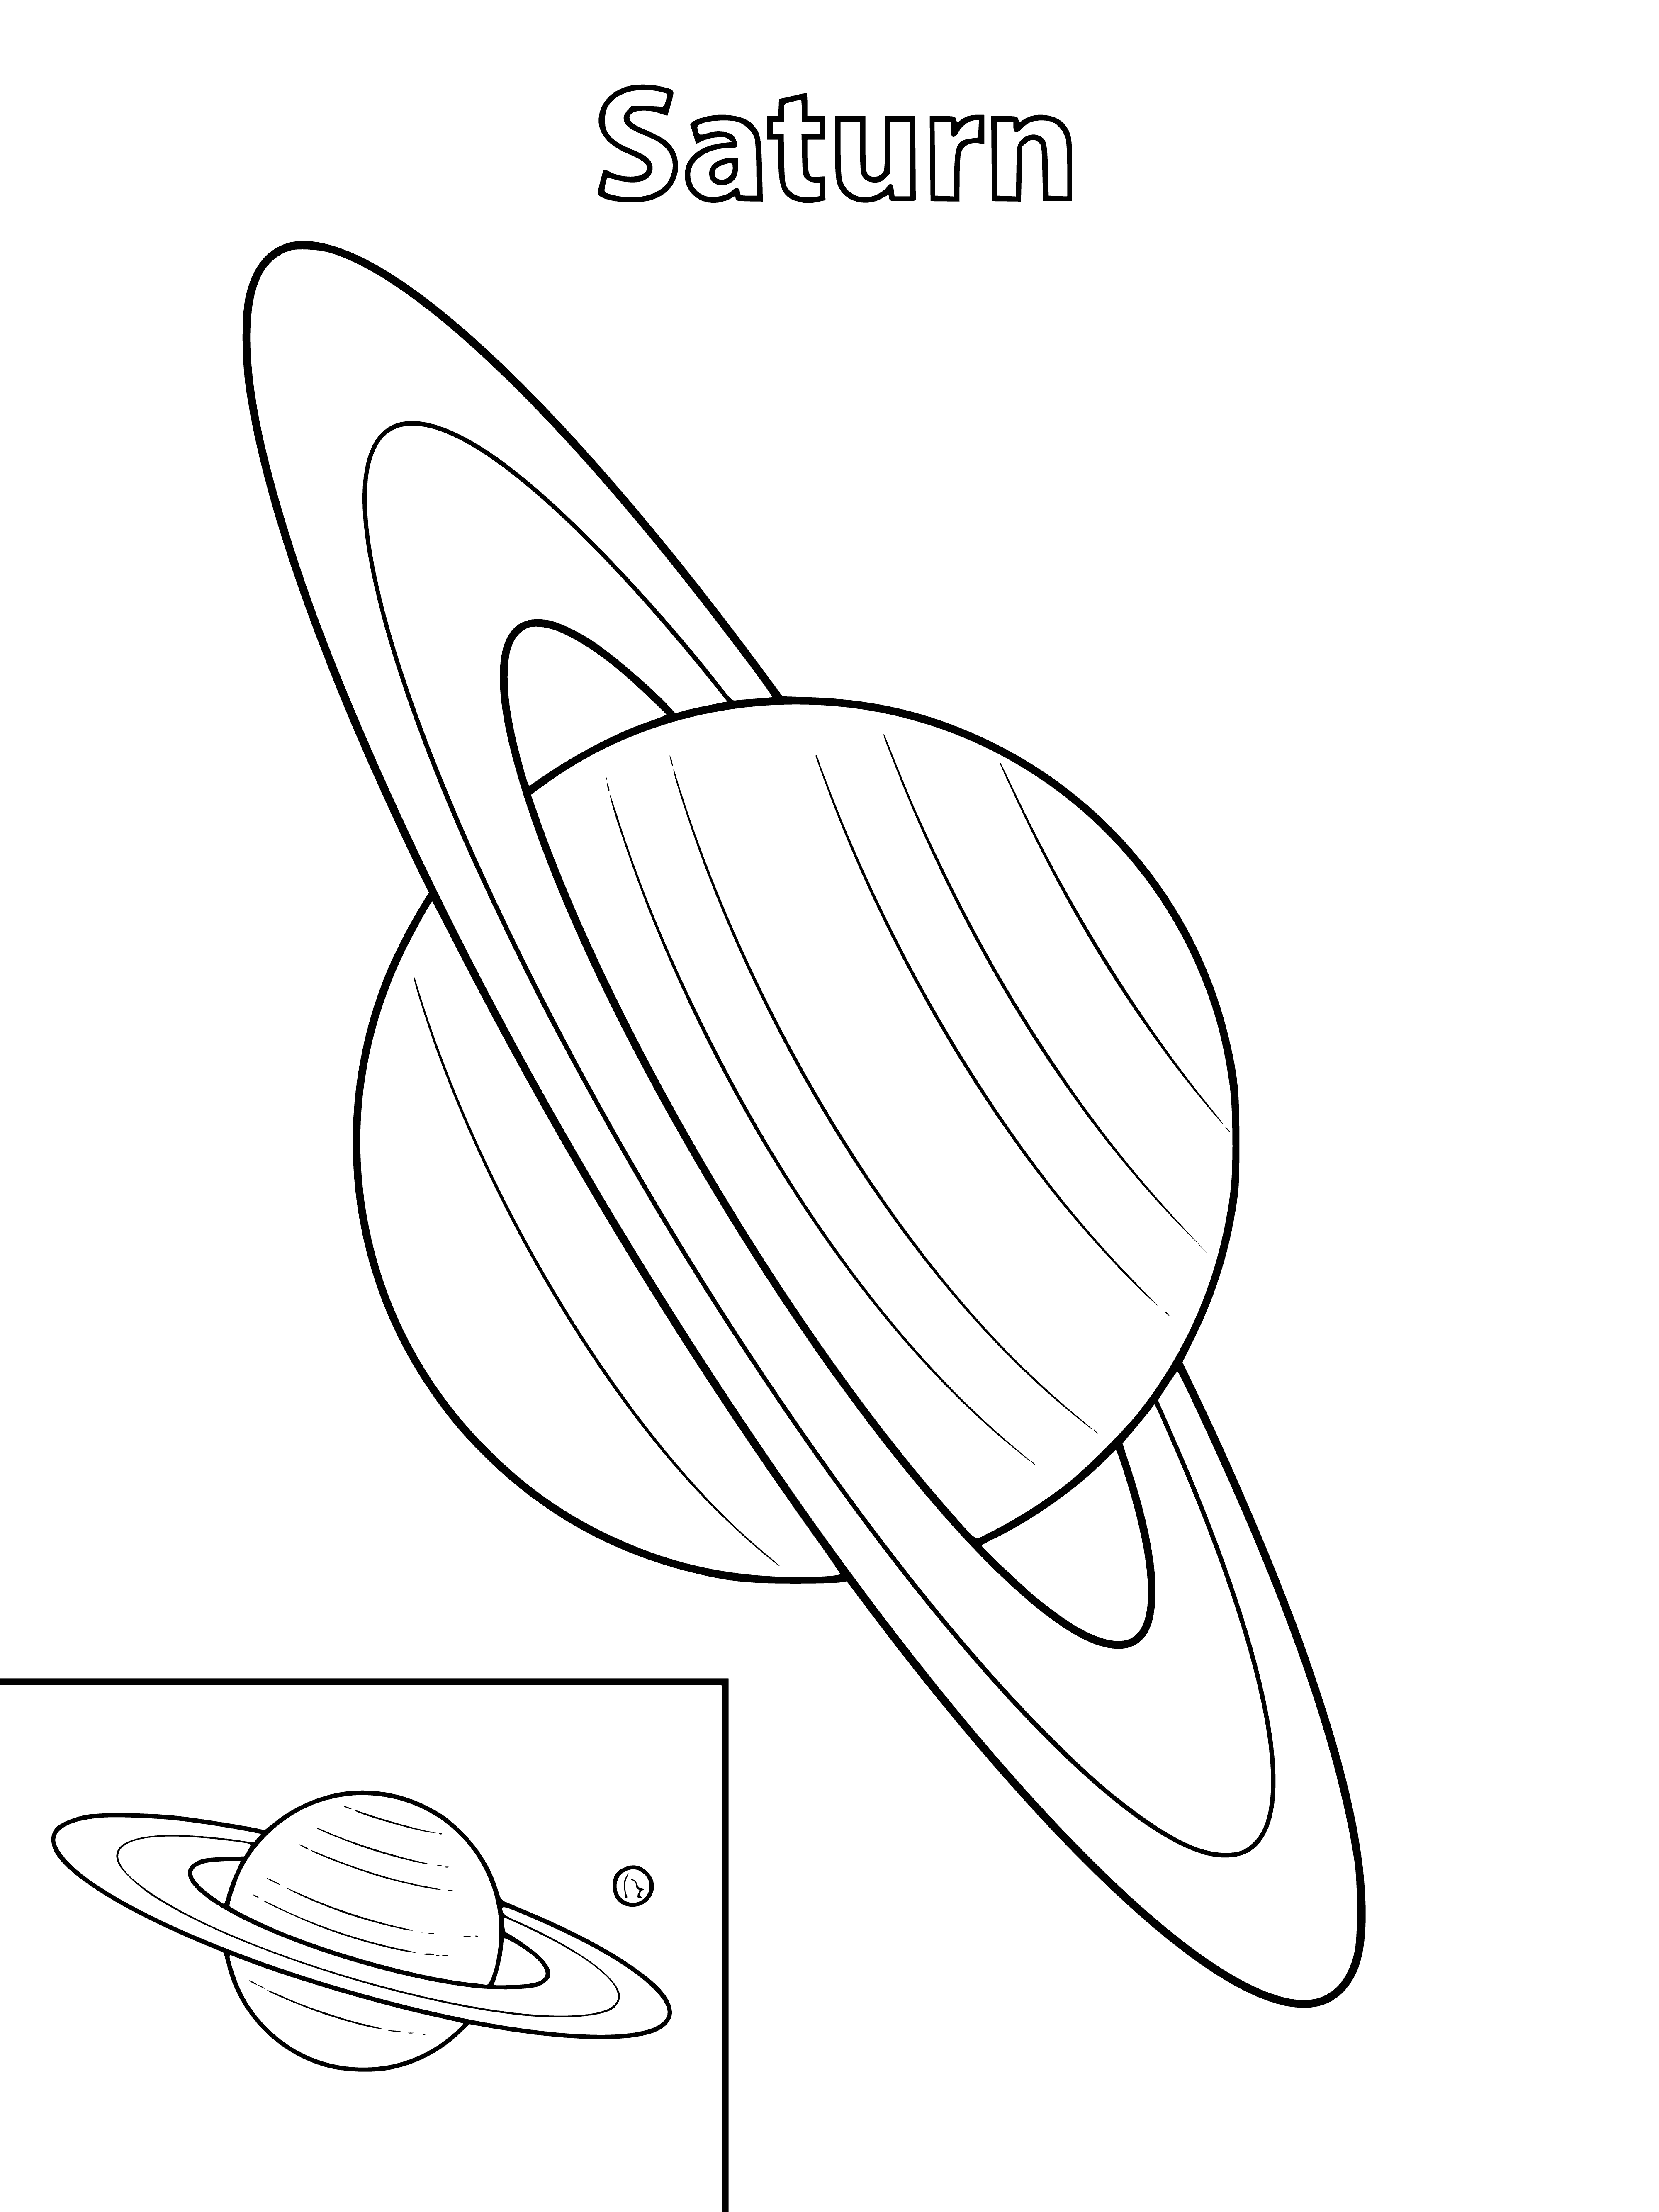 coloring page: Saturn is a giant, icy-cold gas planet 120,000 km wide, w/ an atmosphere of hydrogen & helium, clouds, a yellowish hue & rings of ice/rock up to 280,000 km wide. No surface, thought to have a hot rocky core. Surface temps range from -140C to + 10C.